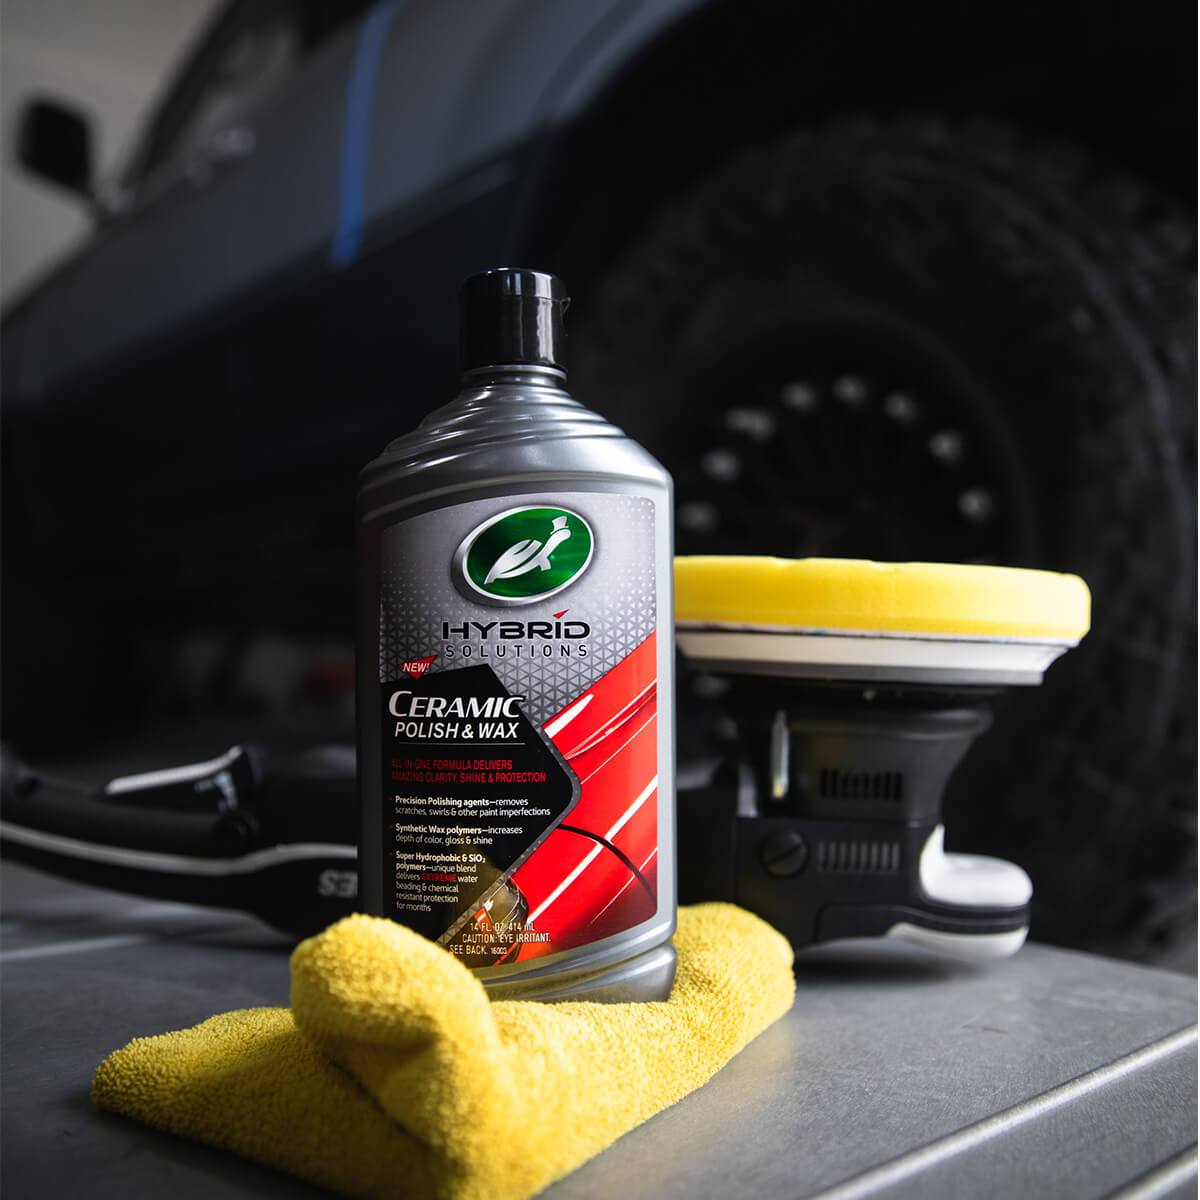 car detailing using clay bar - for removing stubborn dirt from car / wavex claybar  kit 